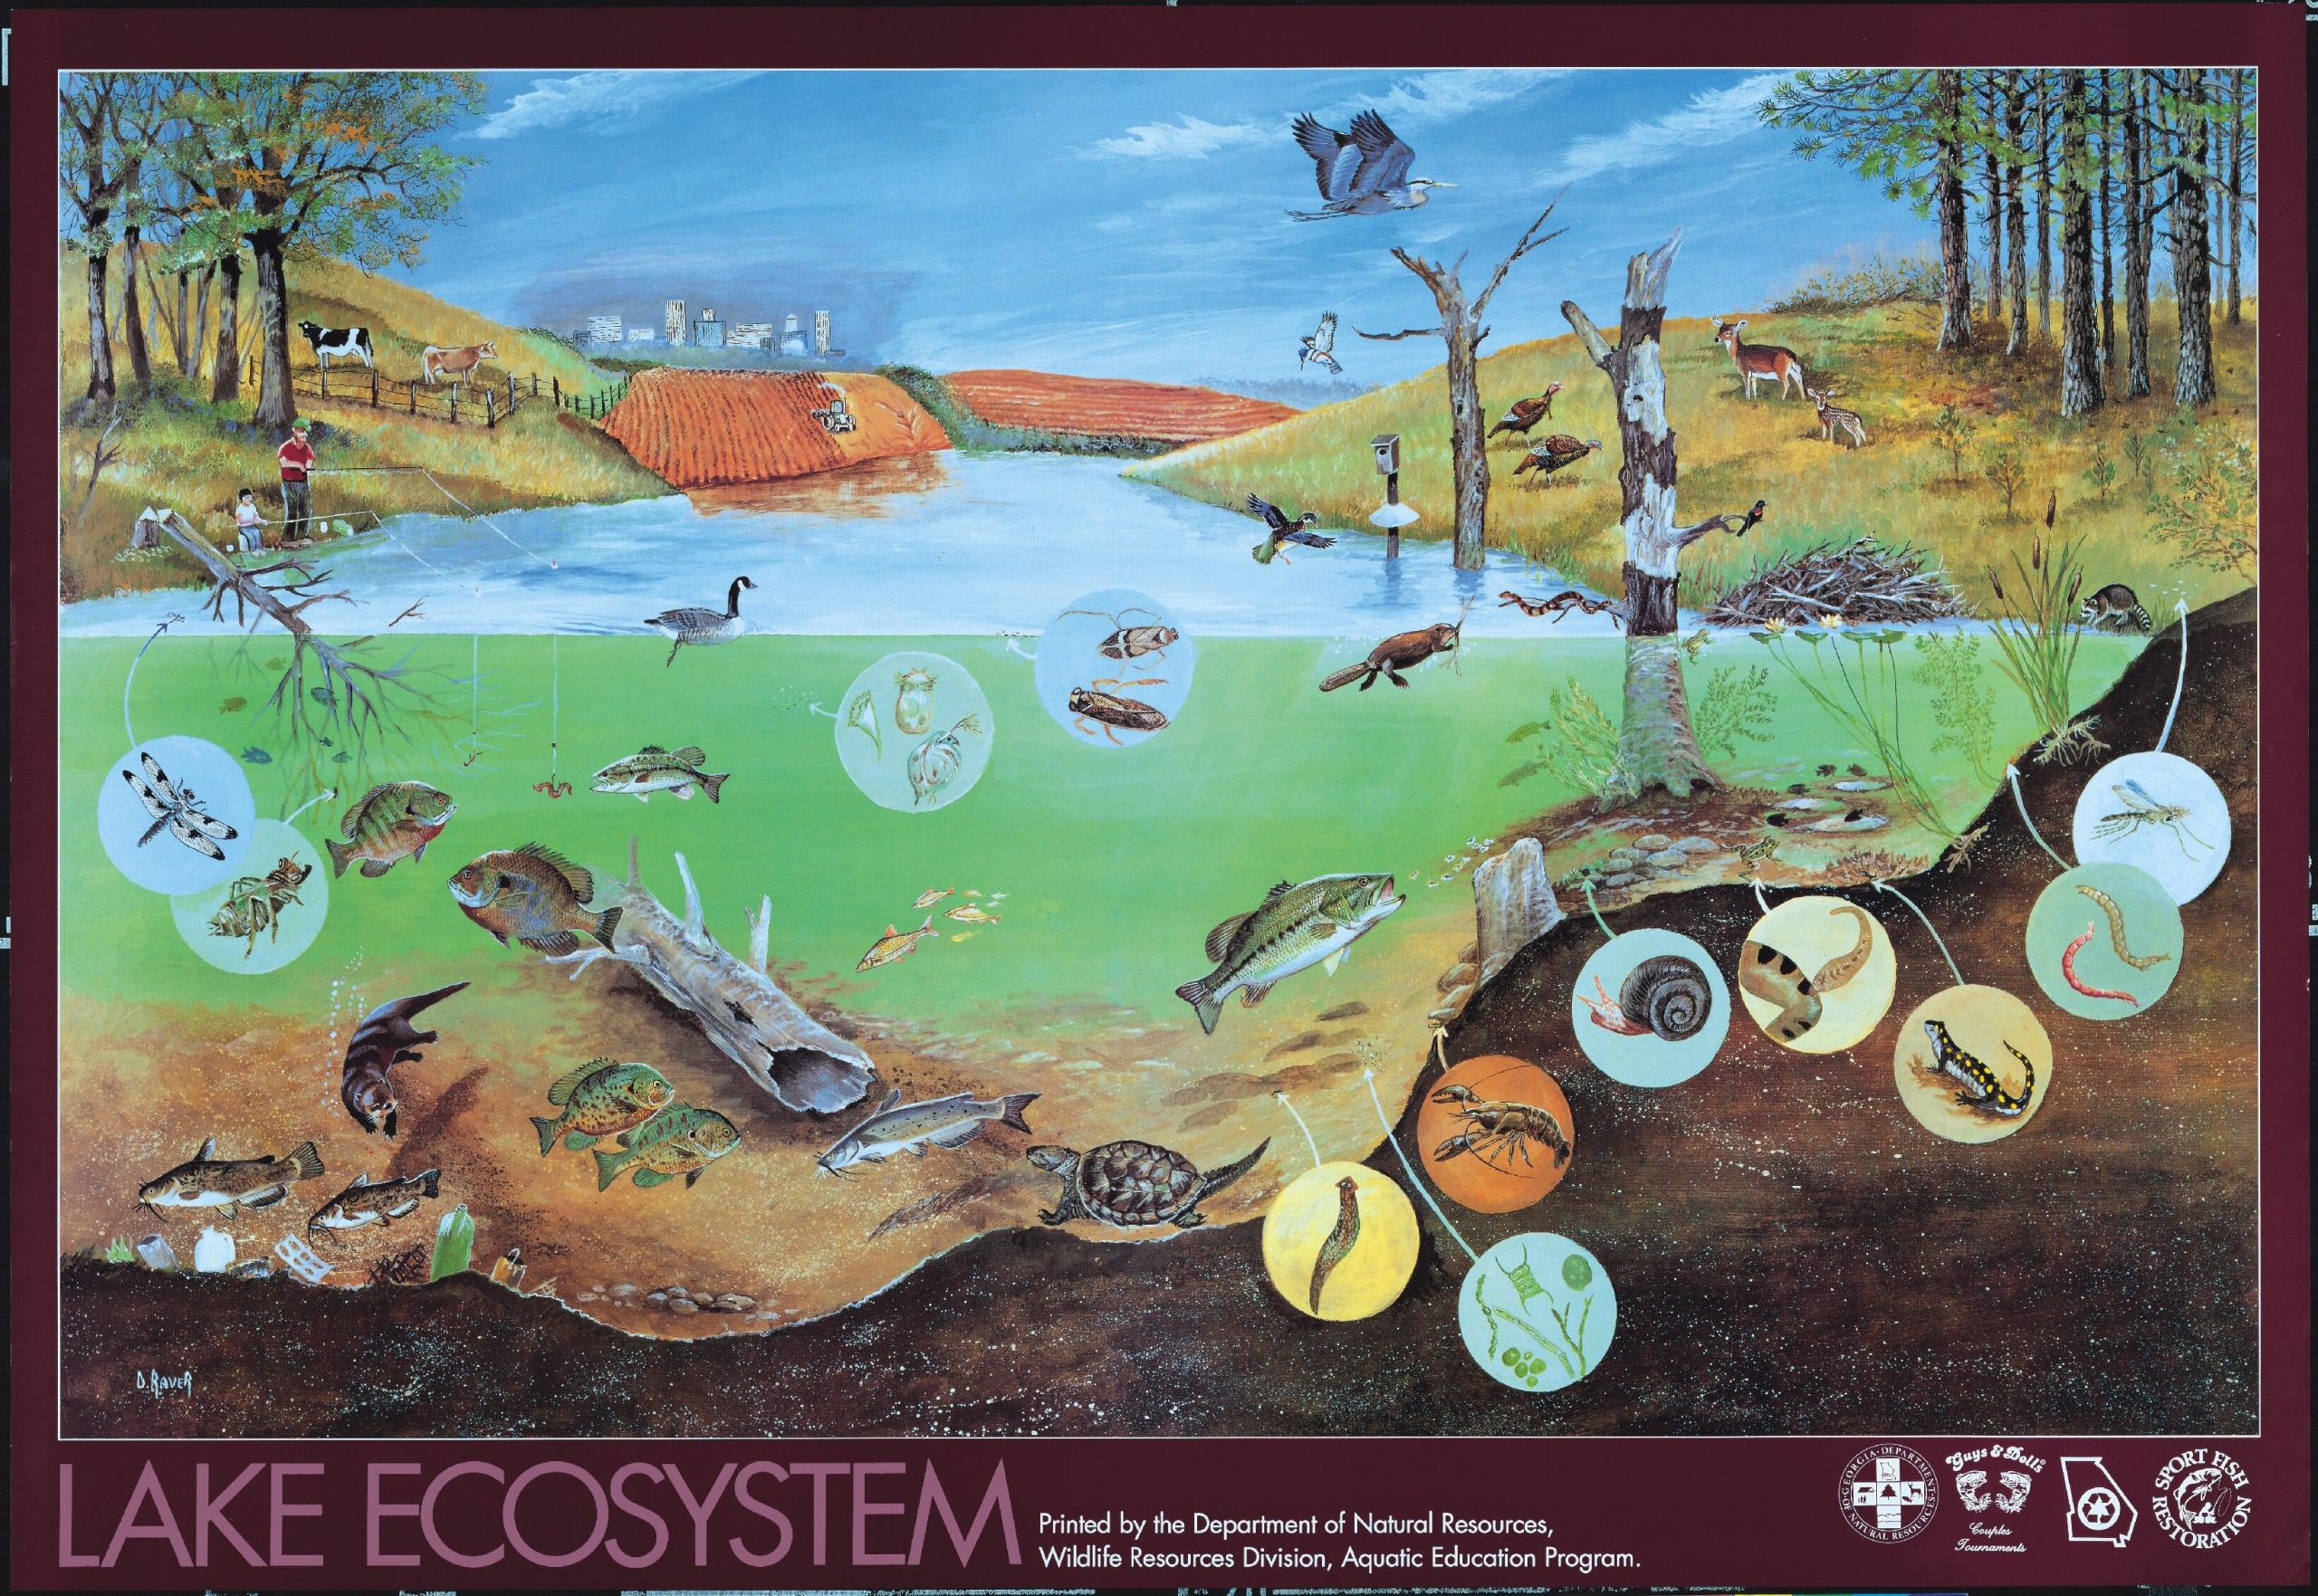 This is a lakes ecosystem